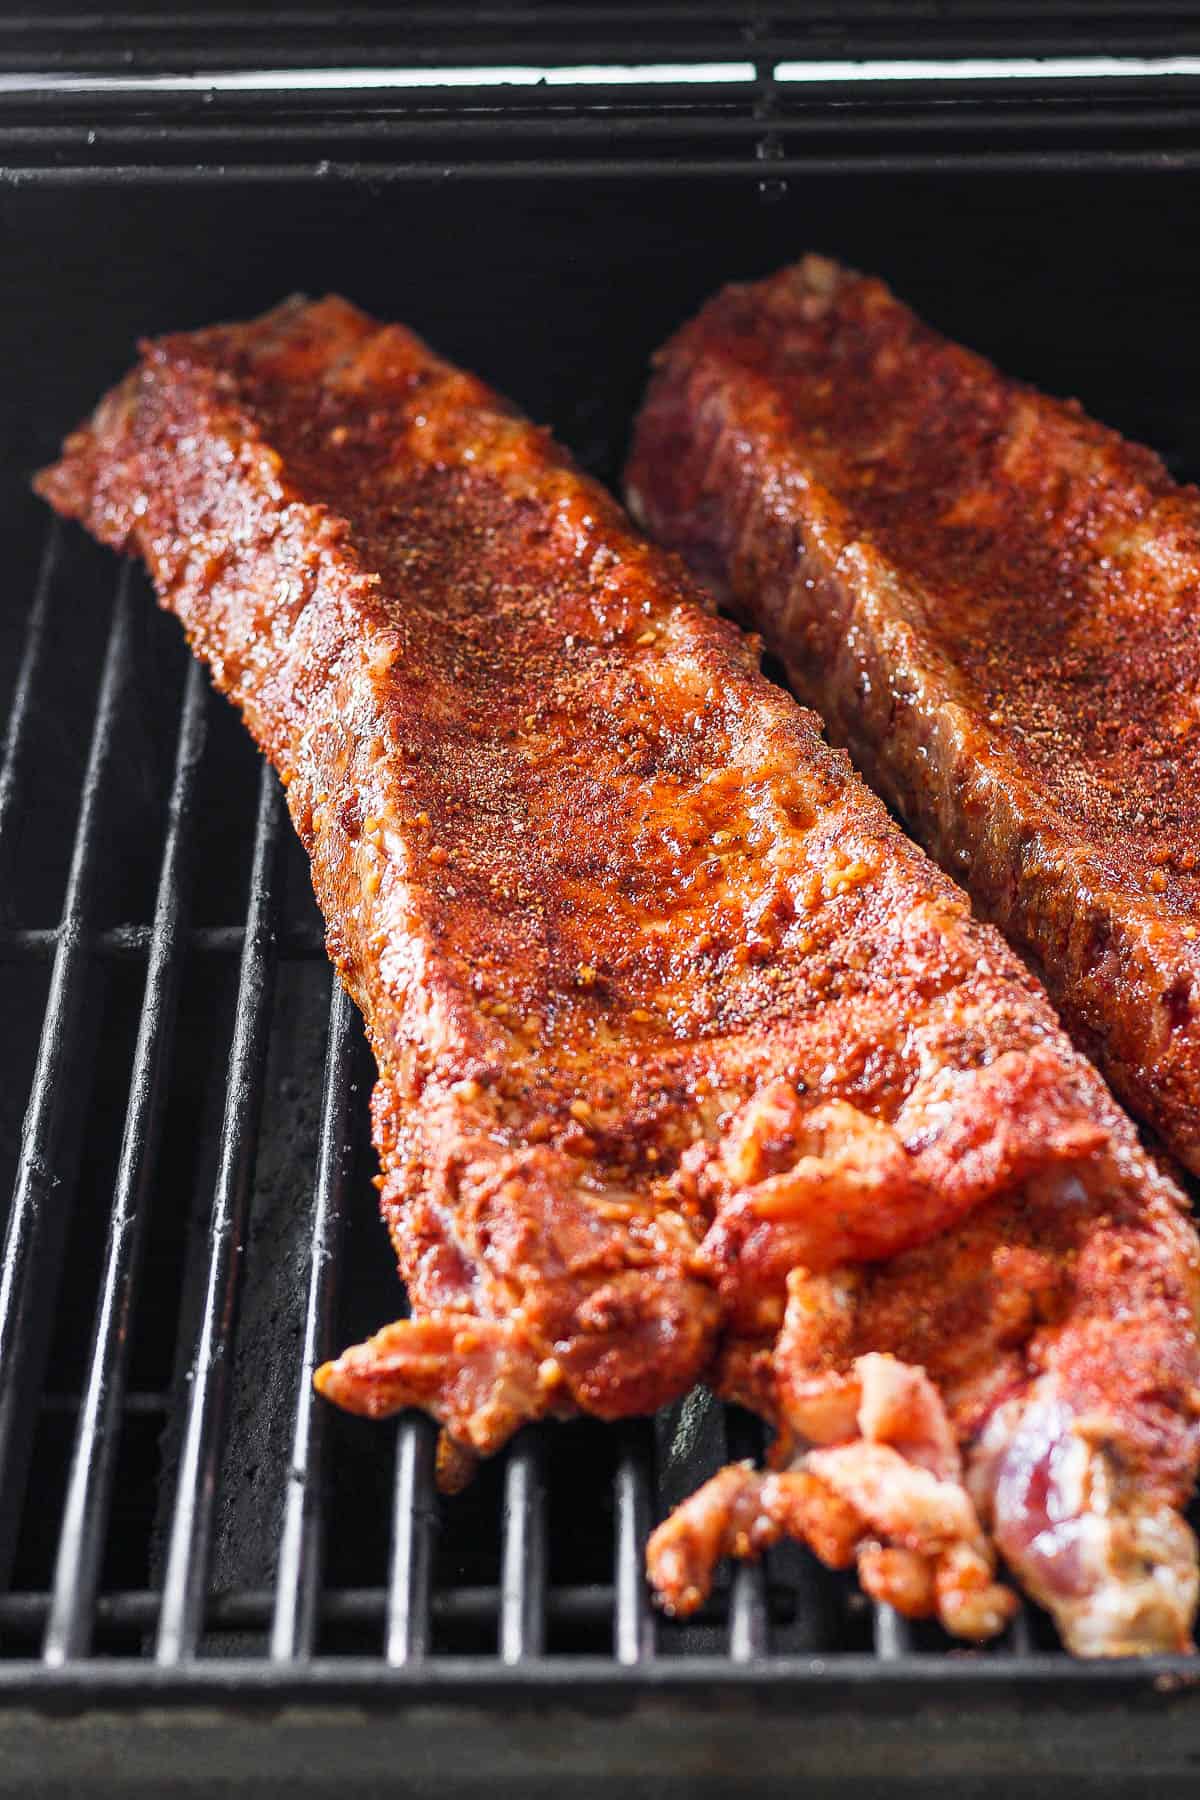 Seasoned ribs on the hot grill grates.